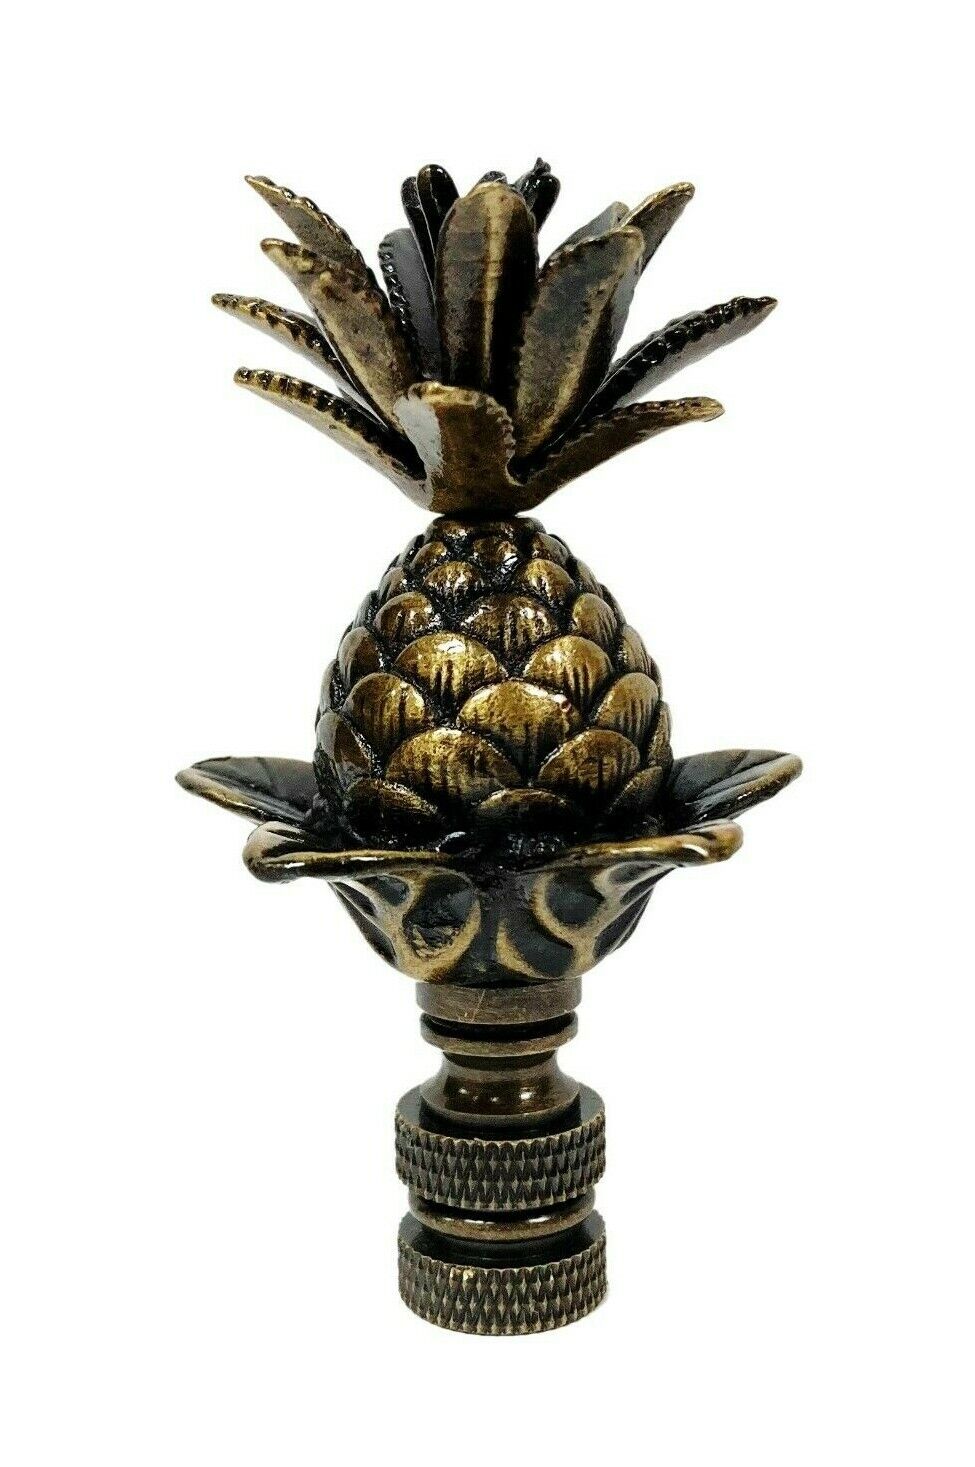 Lamp Finial-LARGE PINEAPPLE-Aged Brass Finish, Highly detailed metal casting-FS